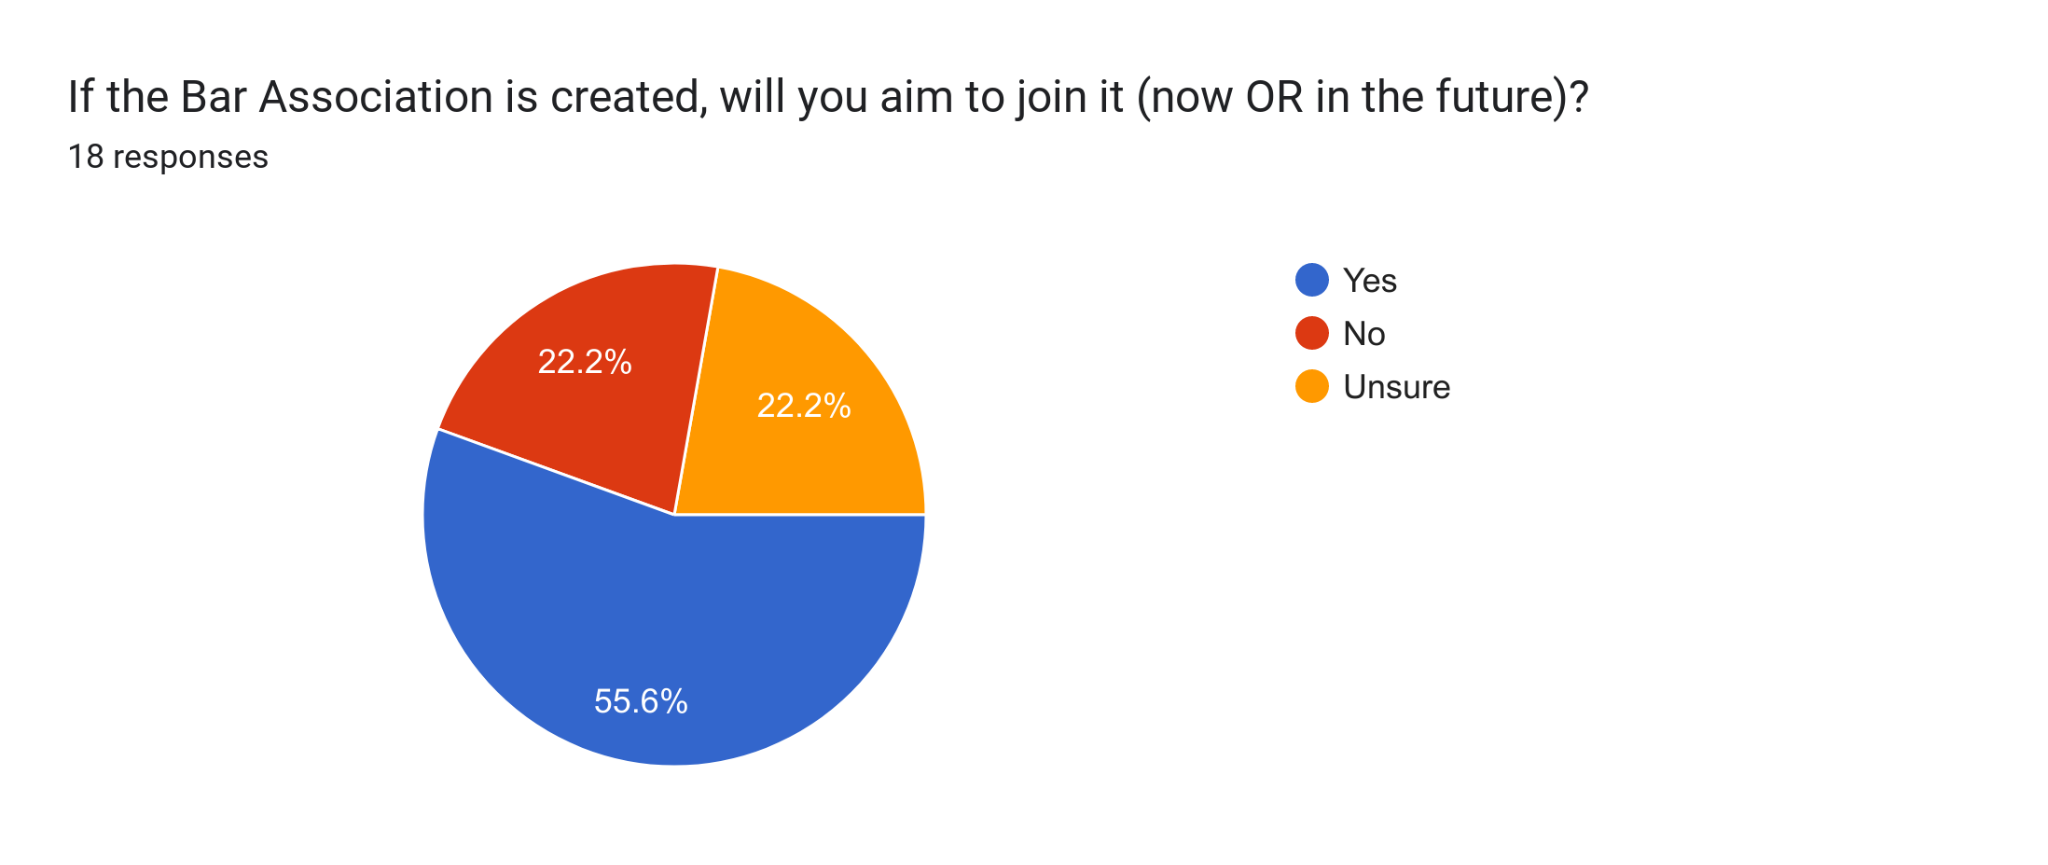 Forms response chart. Question title: If the Bar Association is created, will you aim to join it (now OR in the future)?. Number of responses: 18 responses.